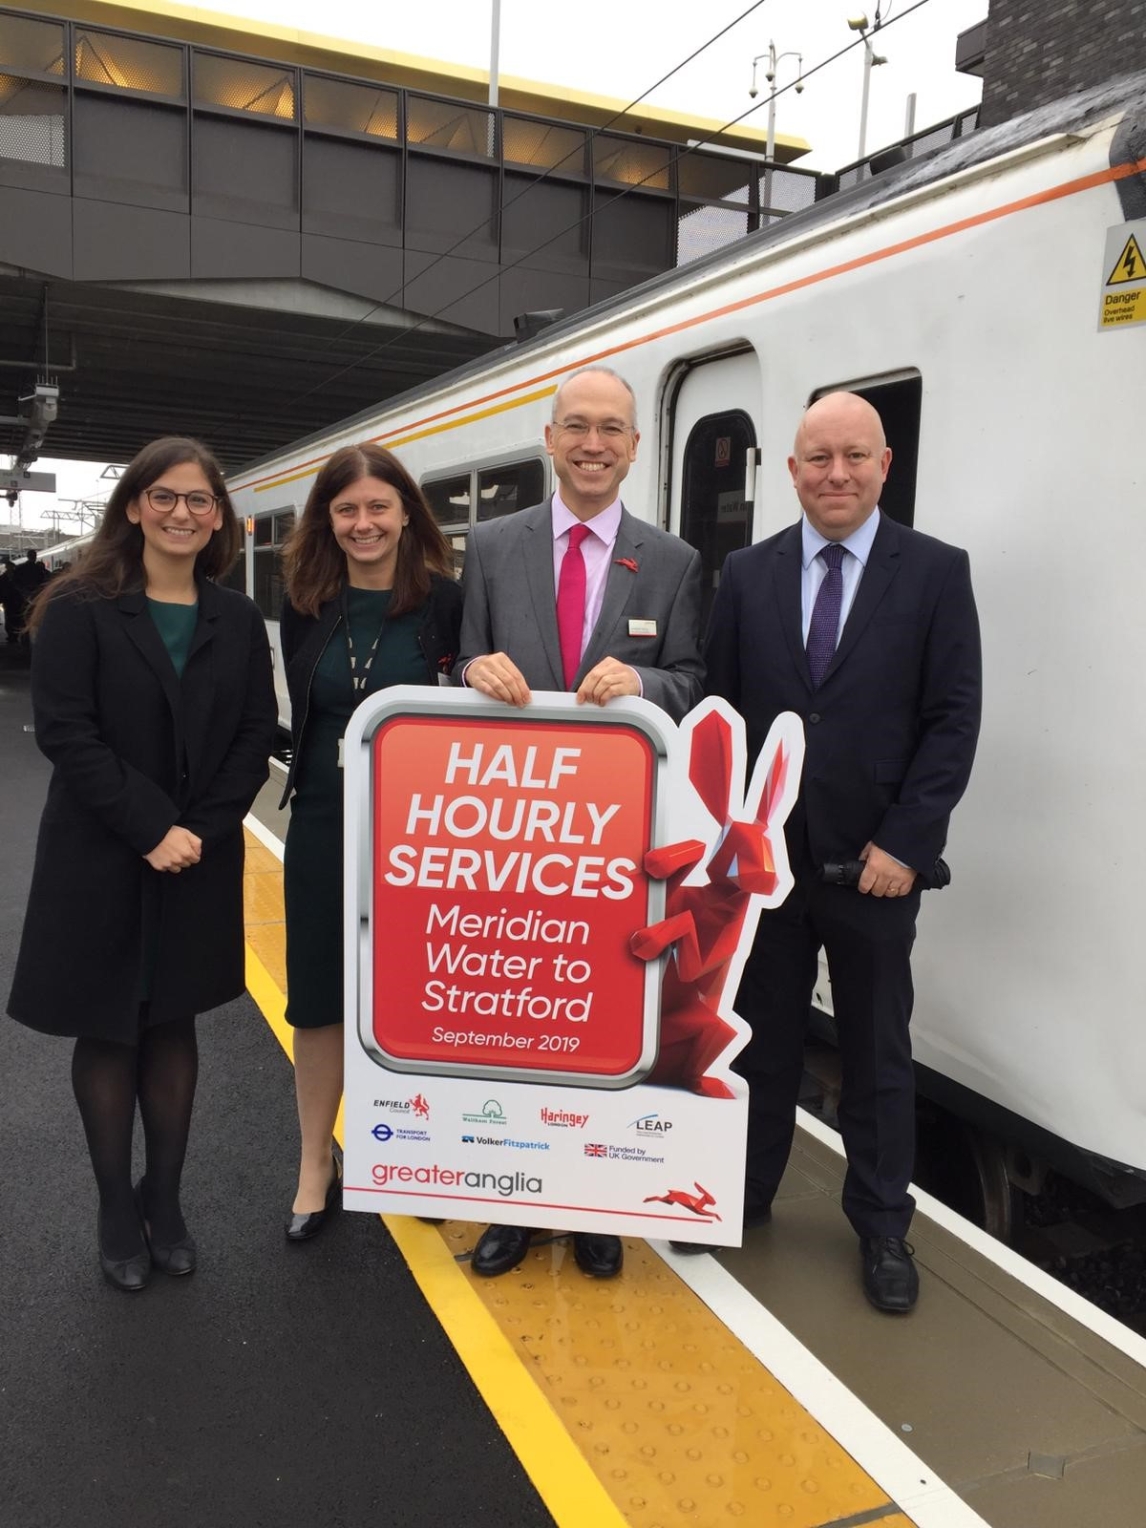 Left to to right: Cllr Nesil Caliskan, Enfield Council, Kate Warner, Director of Route Business Development, Network Rail, Jonathan Denby, Head of Corporate Affairs, Greater Anglia and Steve Vidler, Network Rail.